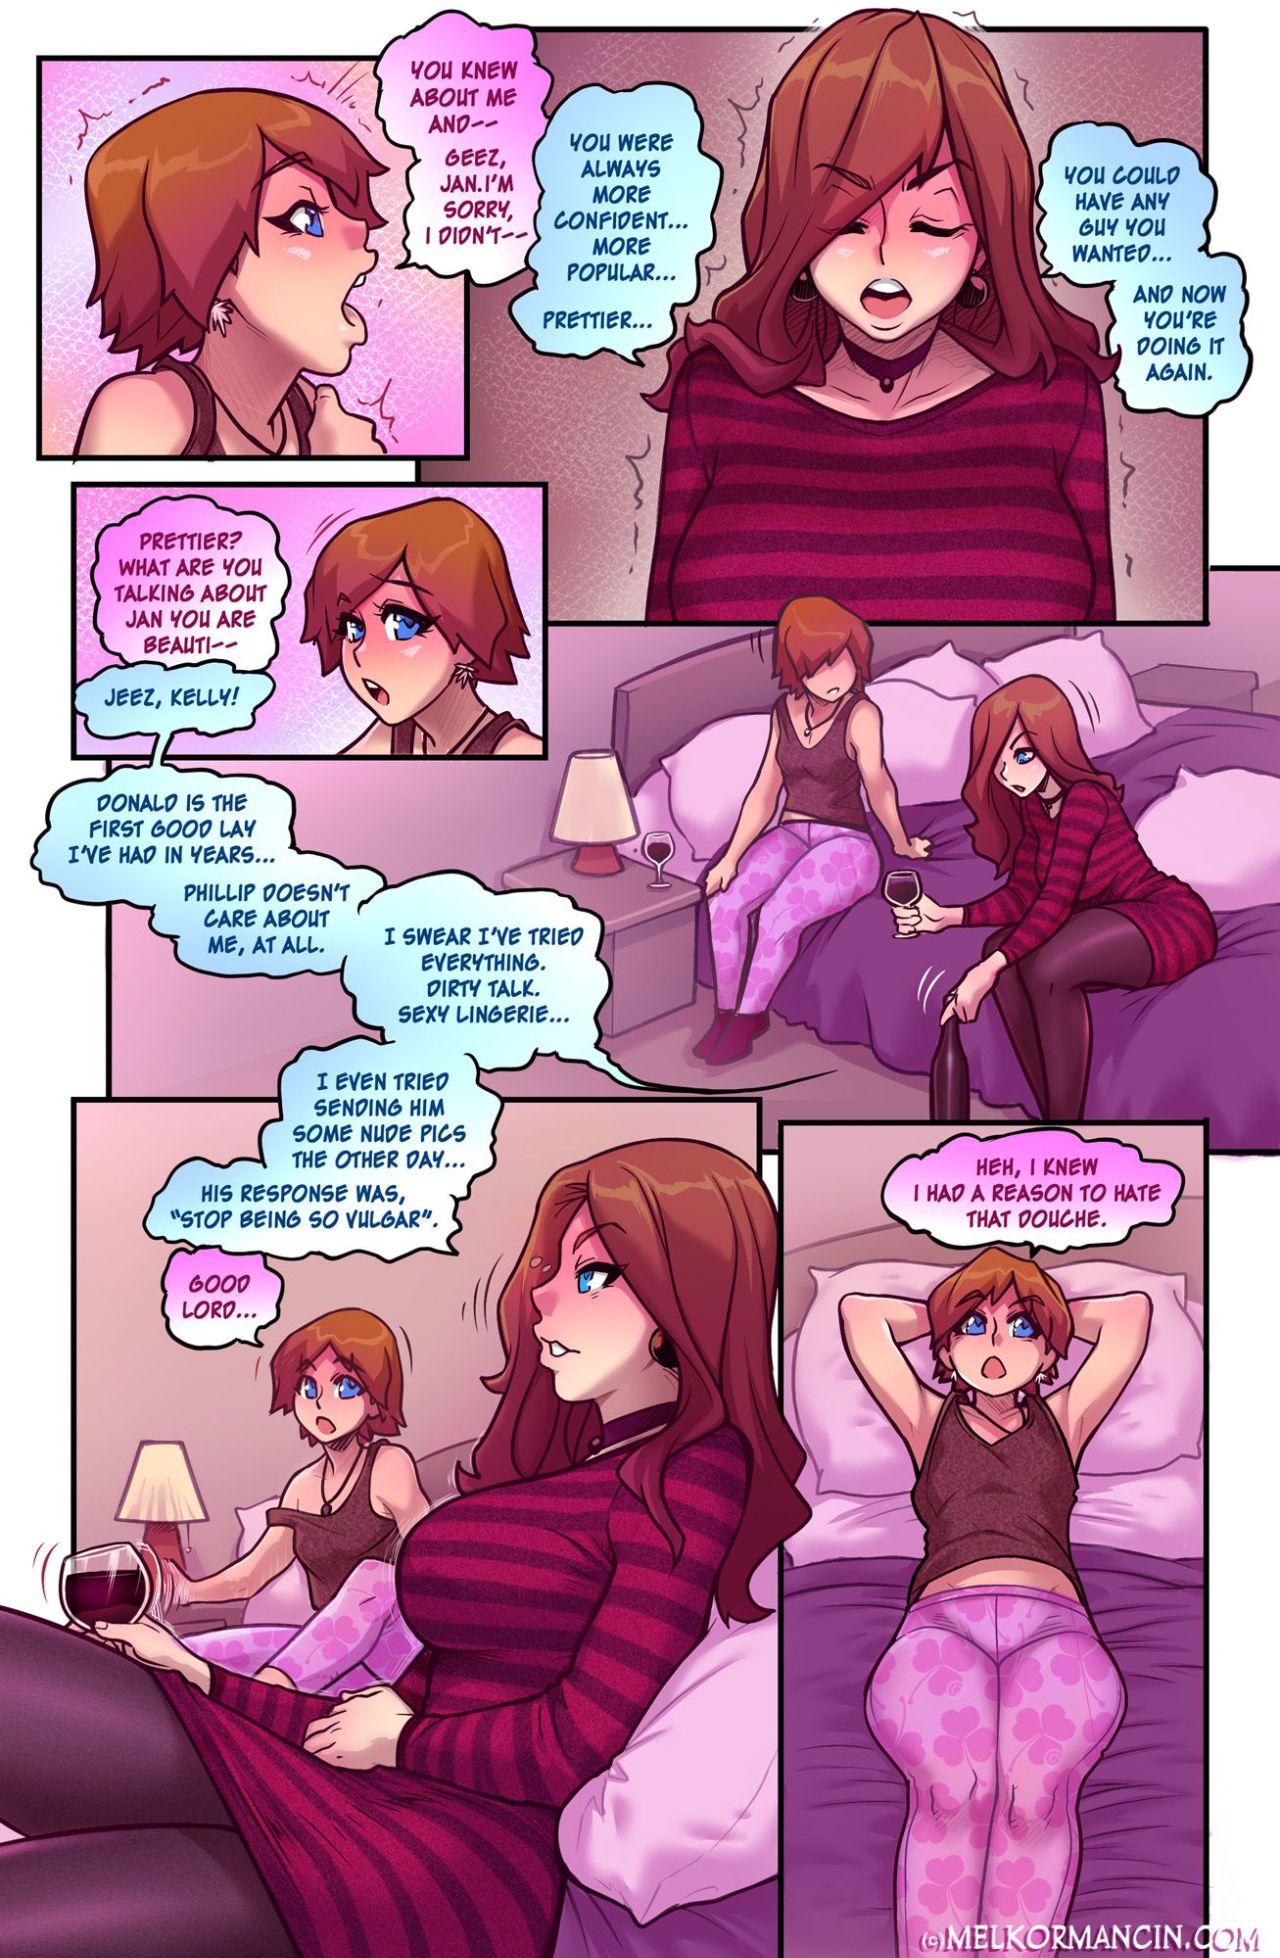 The Naughty In-Law Part 3 Porn Comic english 10 - Porn Comic